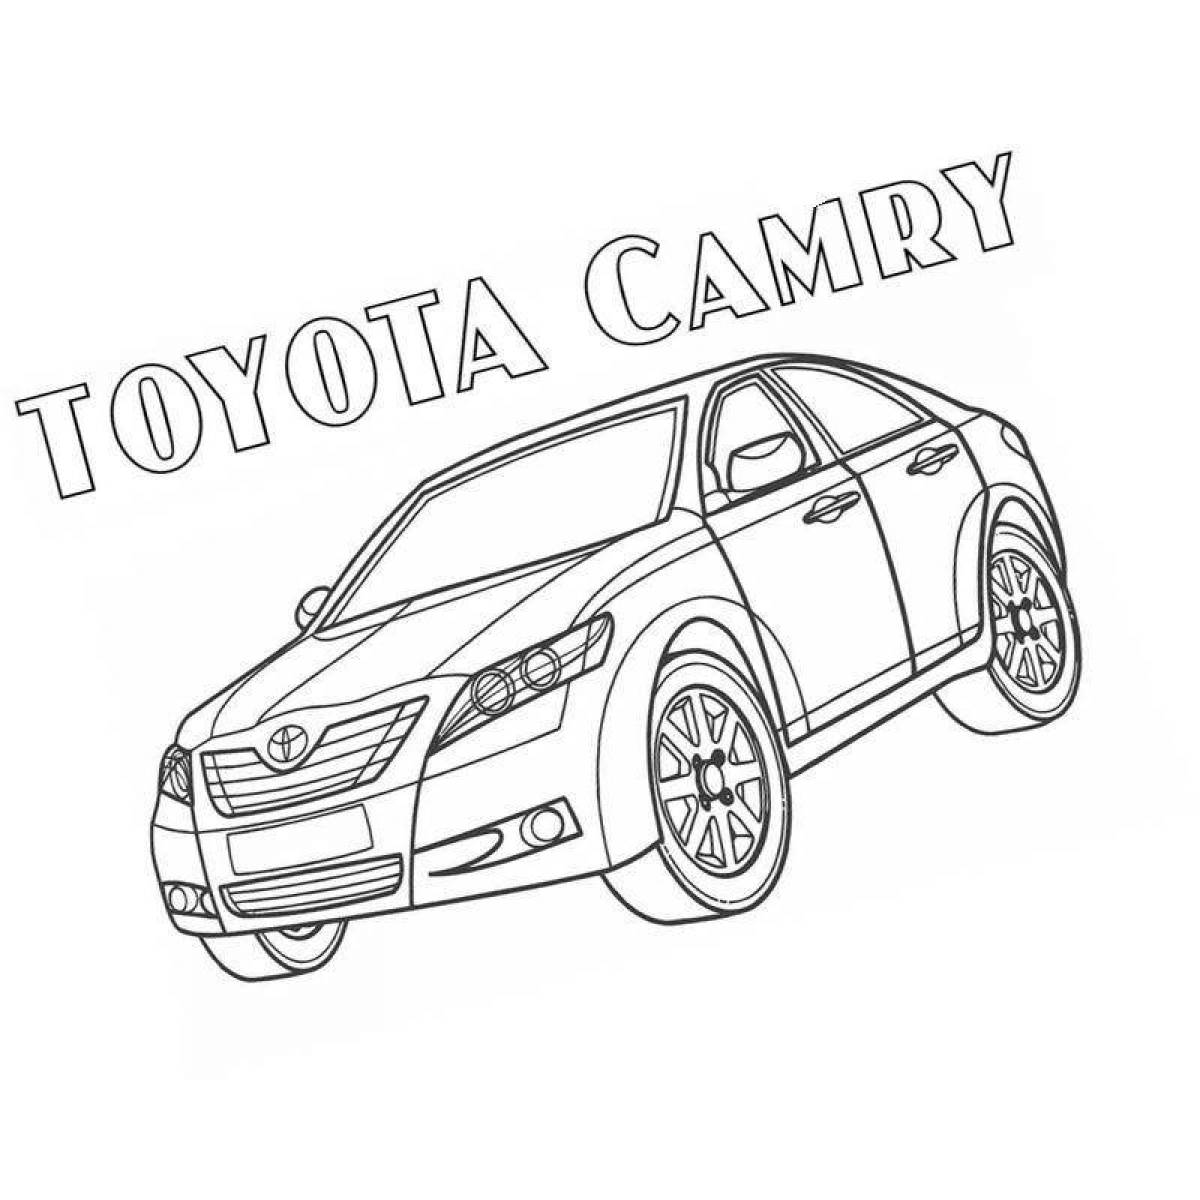 Beautiful camry coloring page